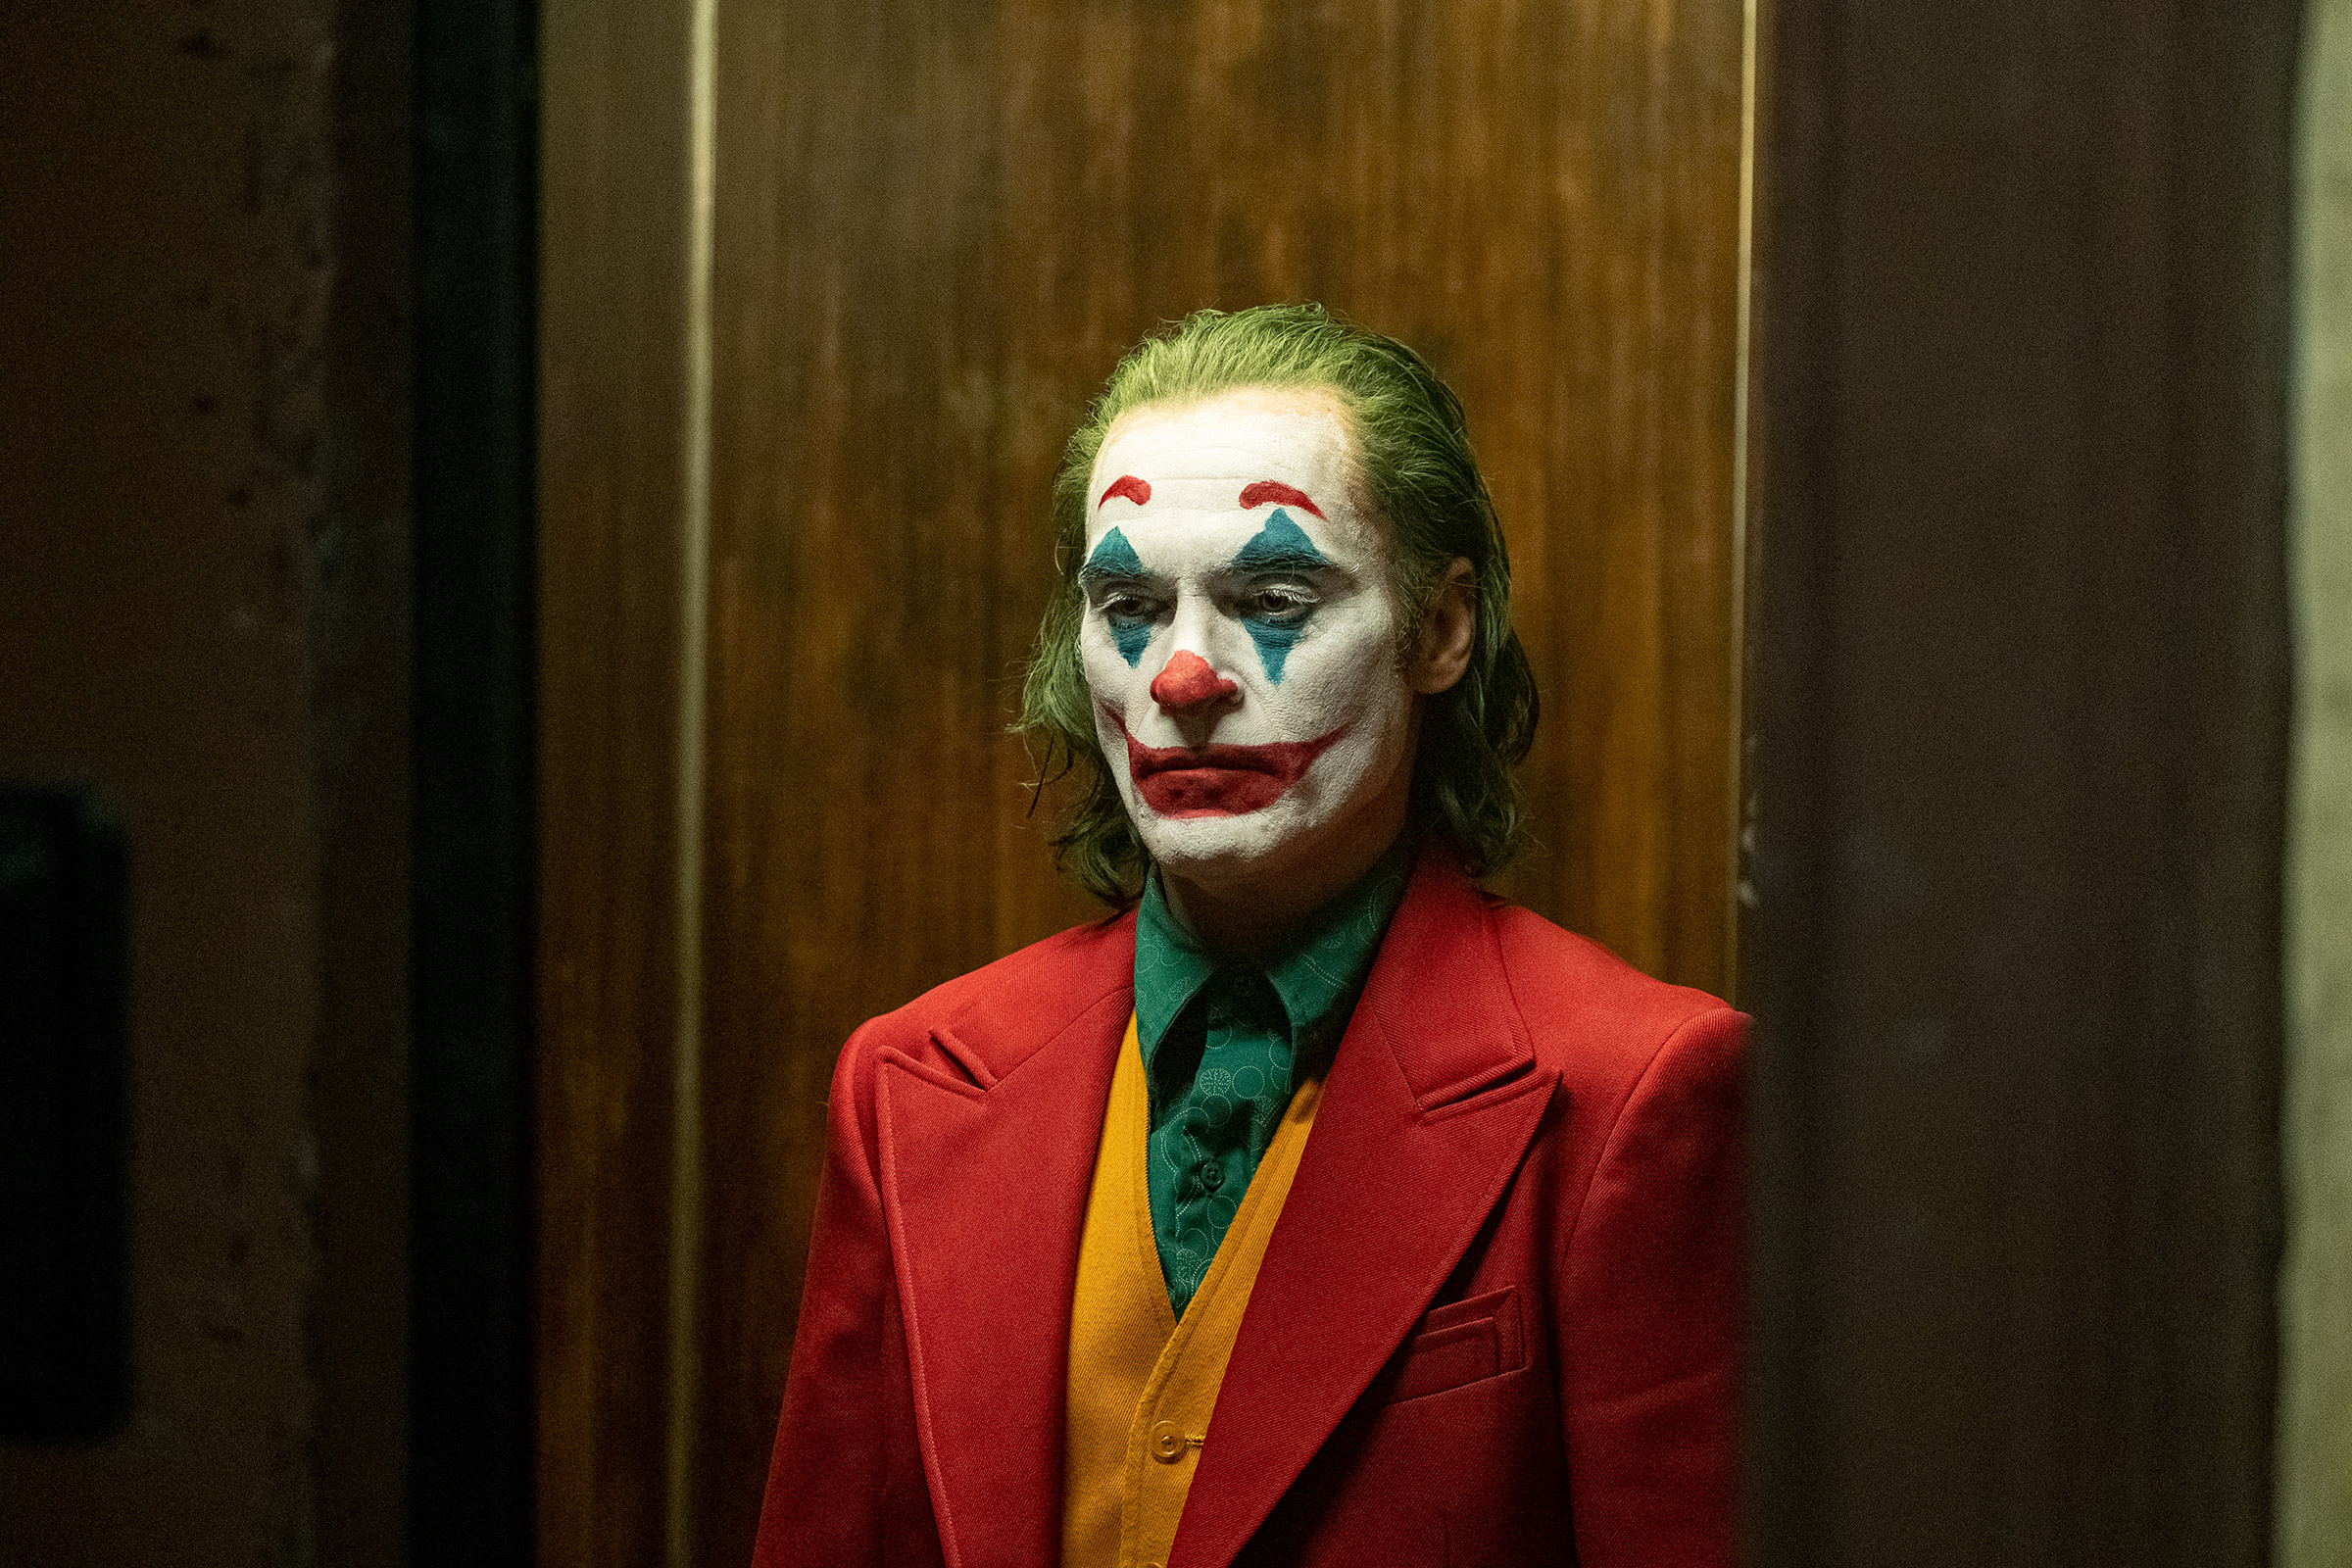 Todd Phillips’ dark take on Joker earned 11 nominations, including Actor in a Leading Role for star Joaquin Phoenix, Adapted Screenplay and Best Picture (Warner Bros.)